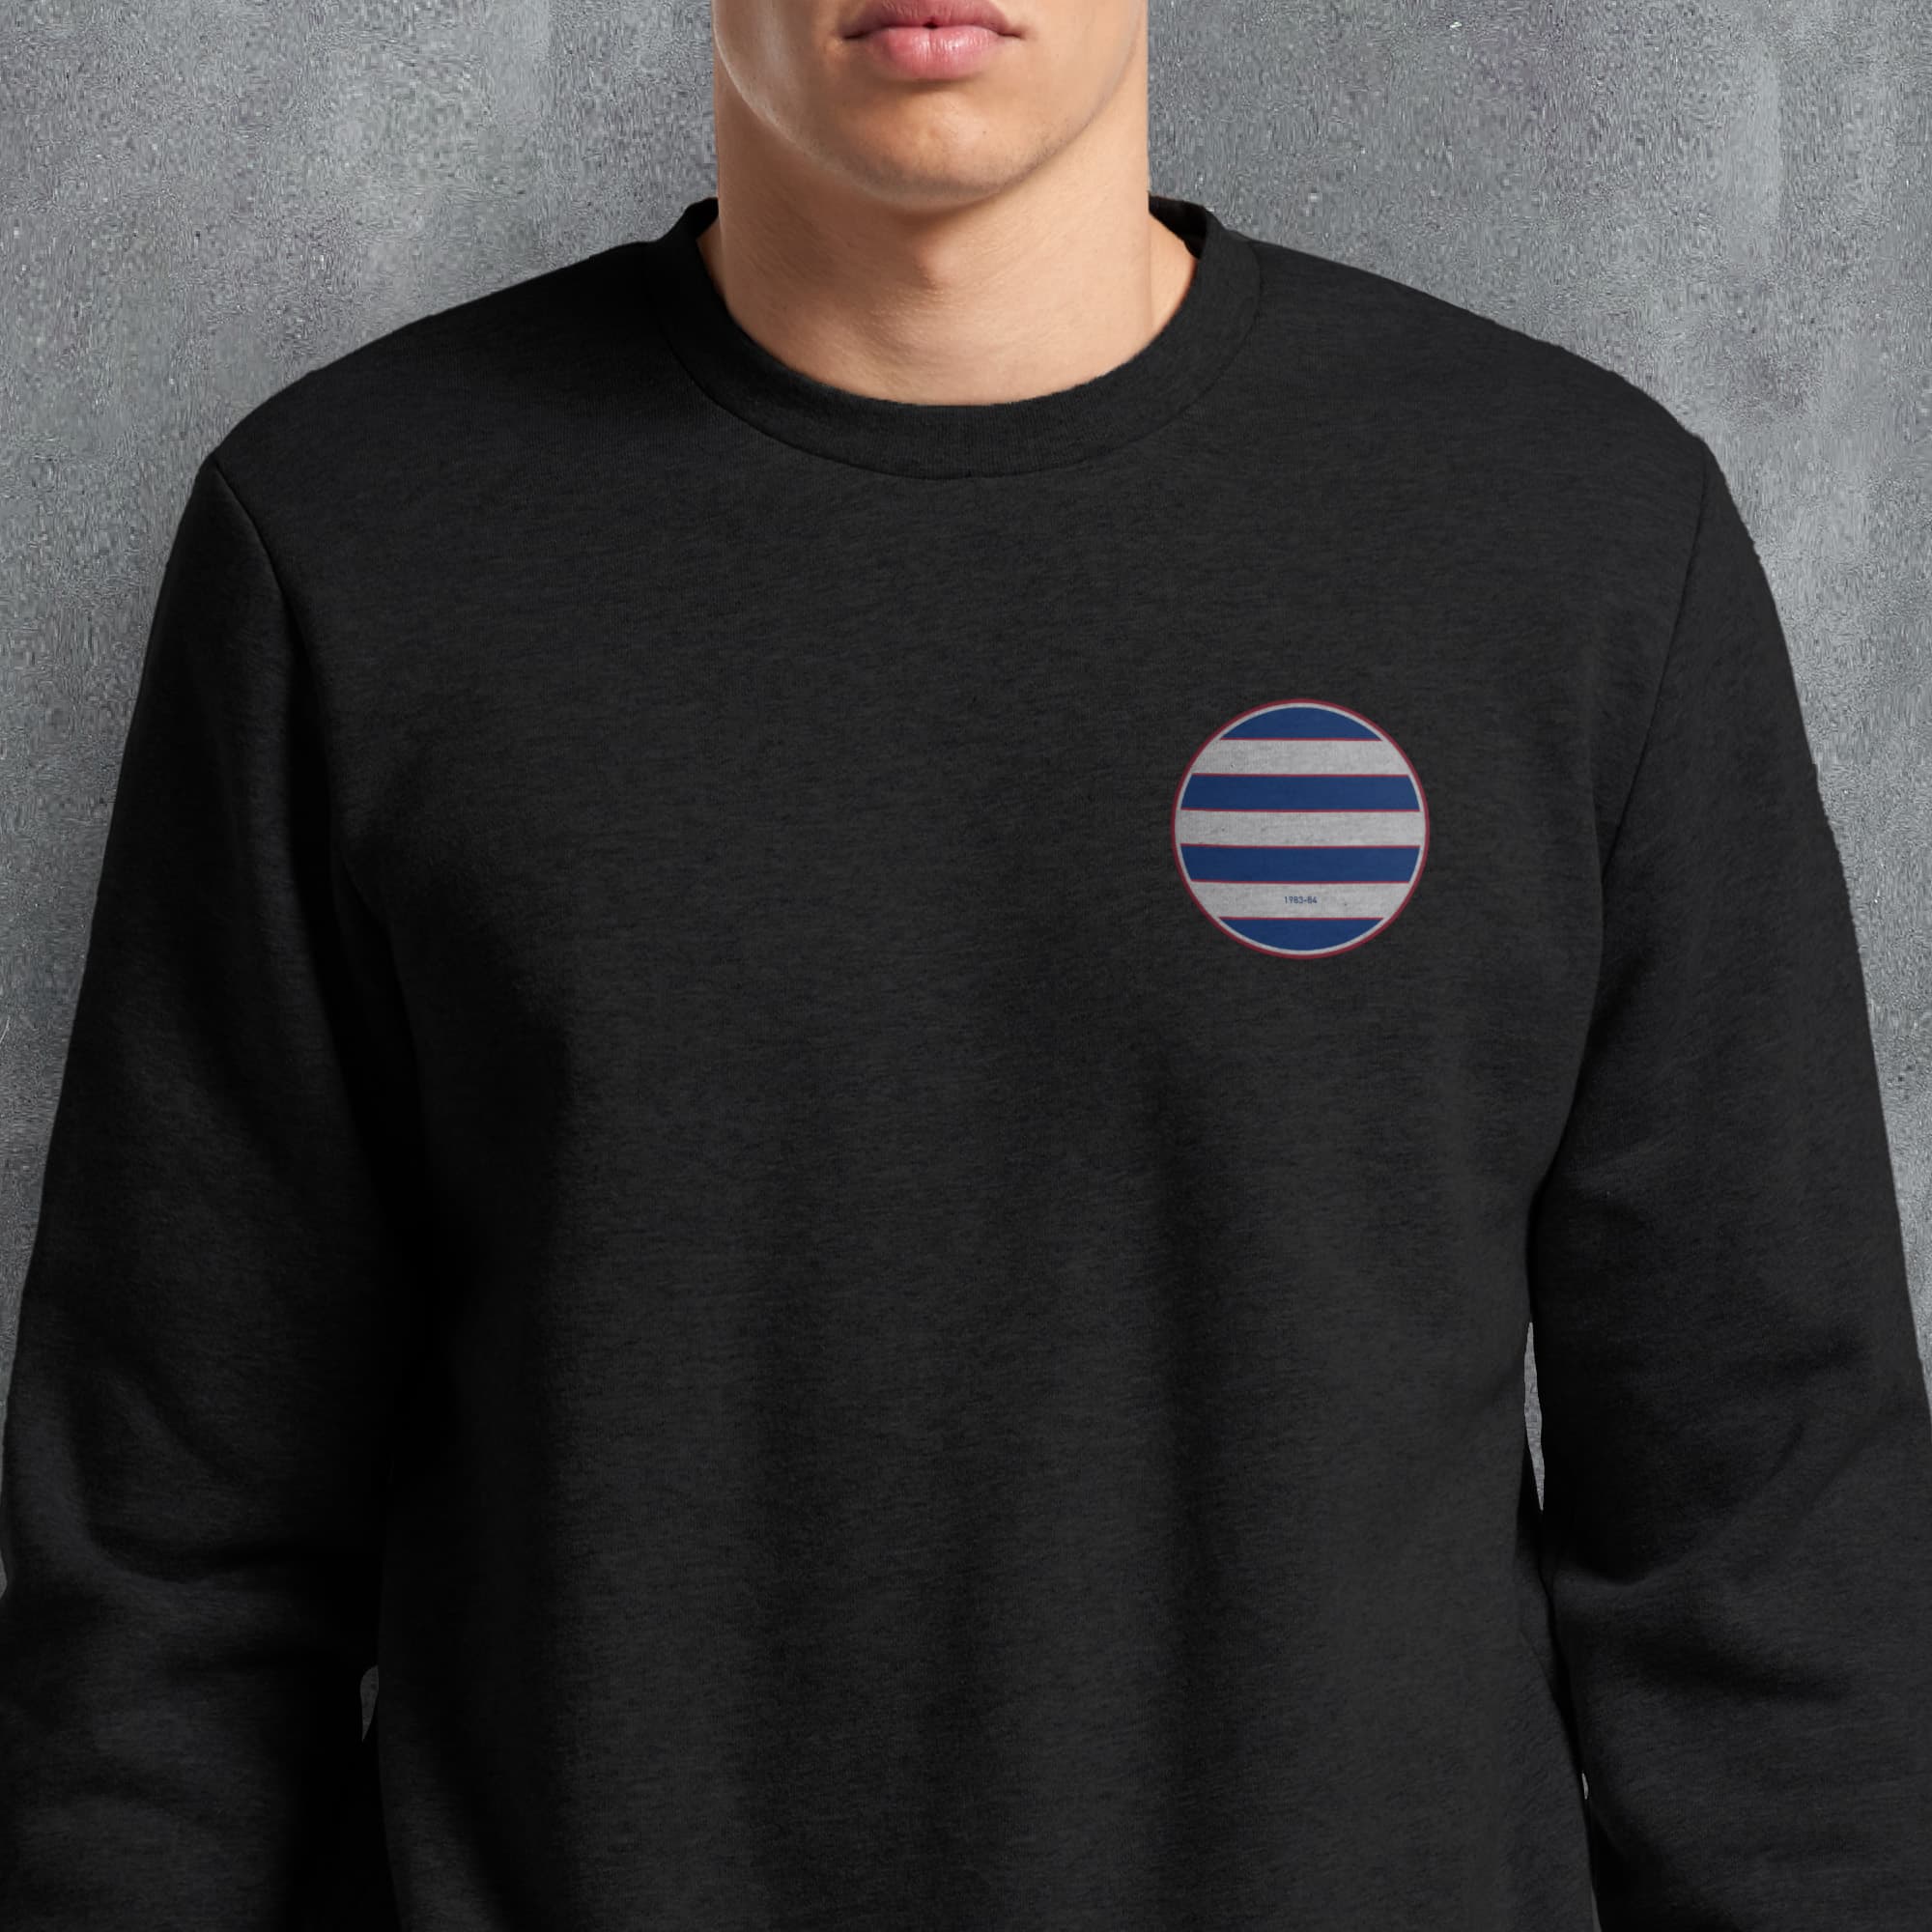 a man wearing a black sweatshirt with a blue and white circle on it